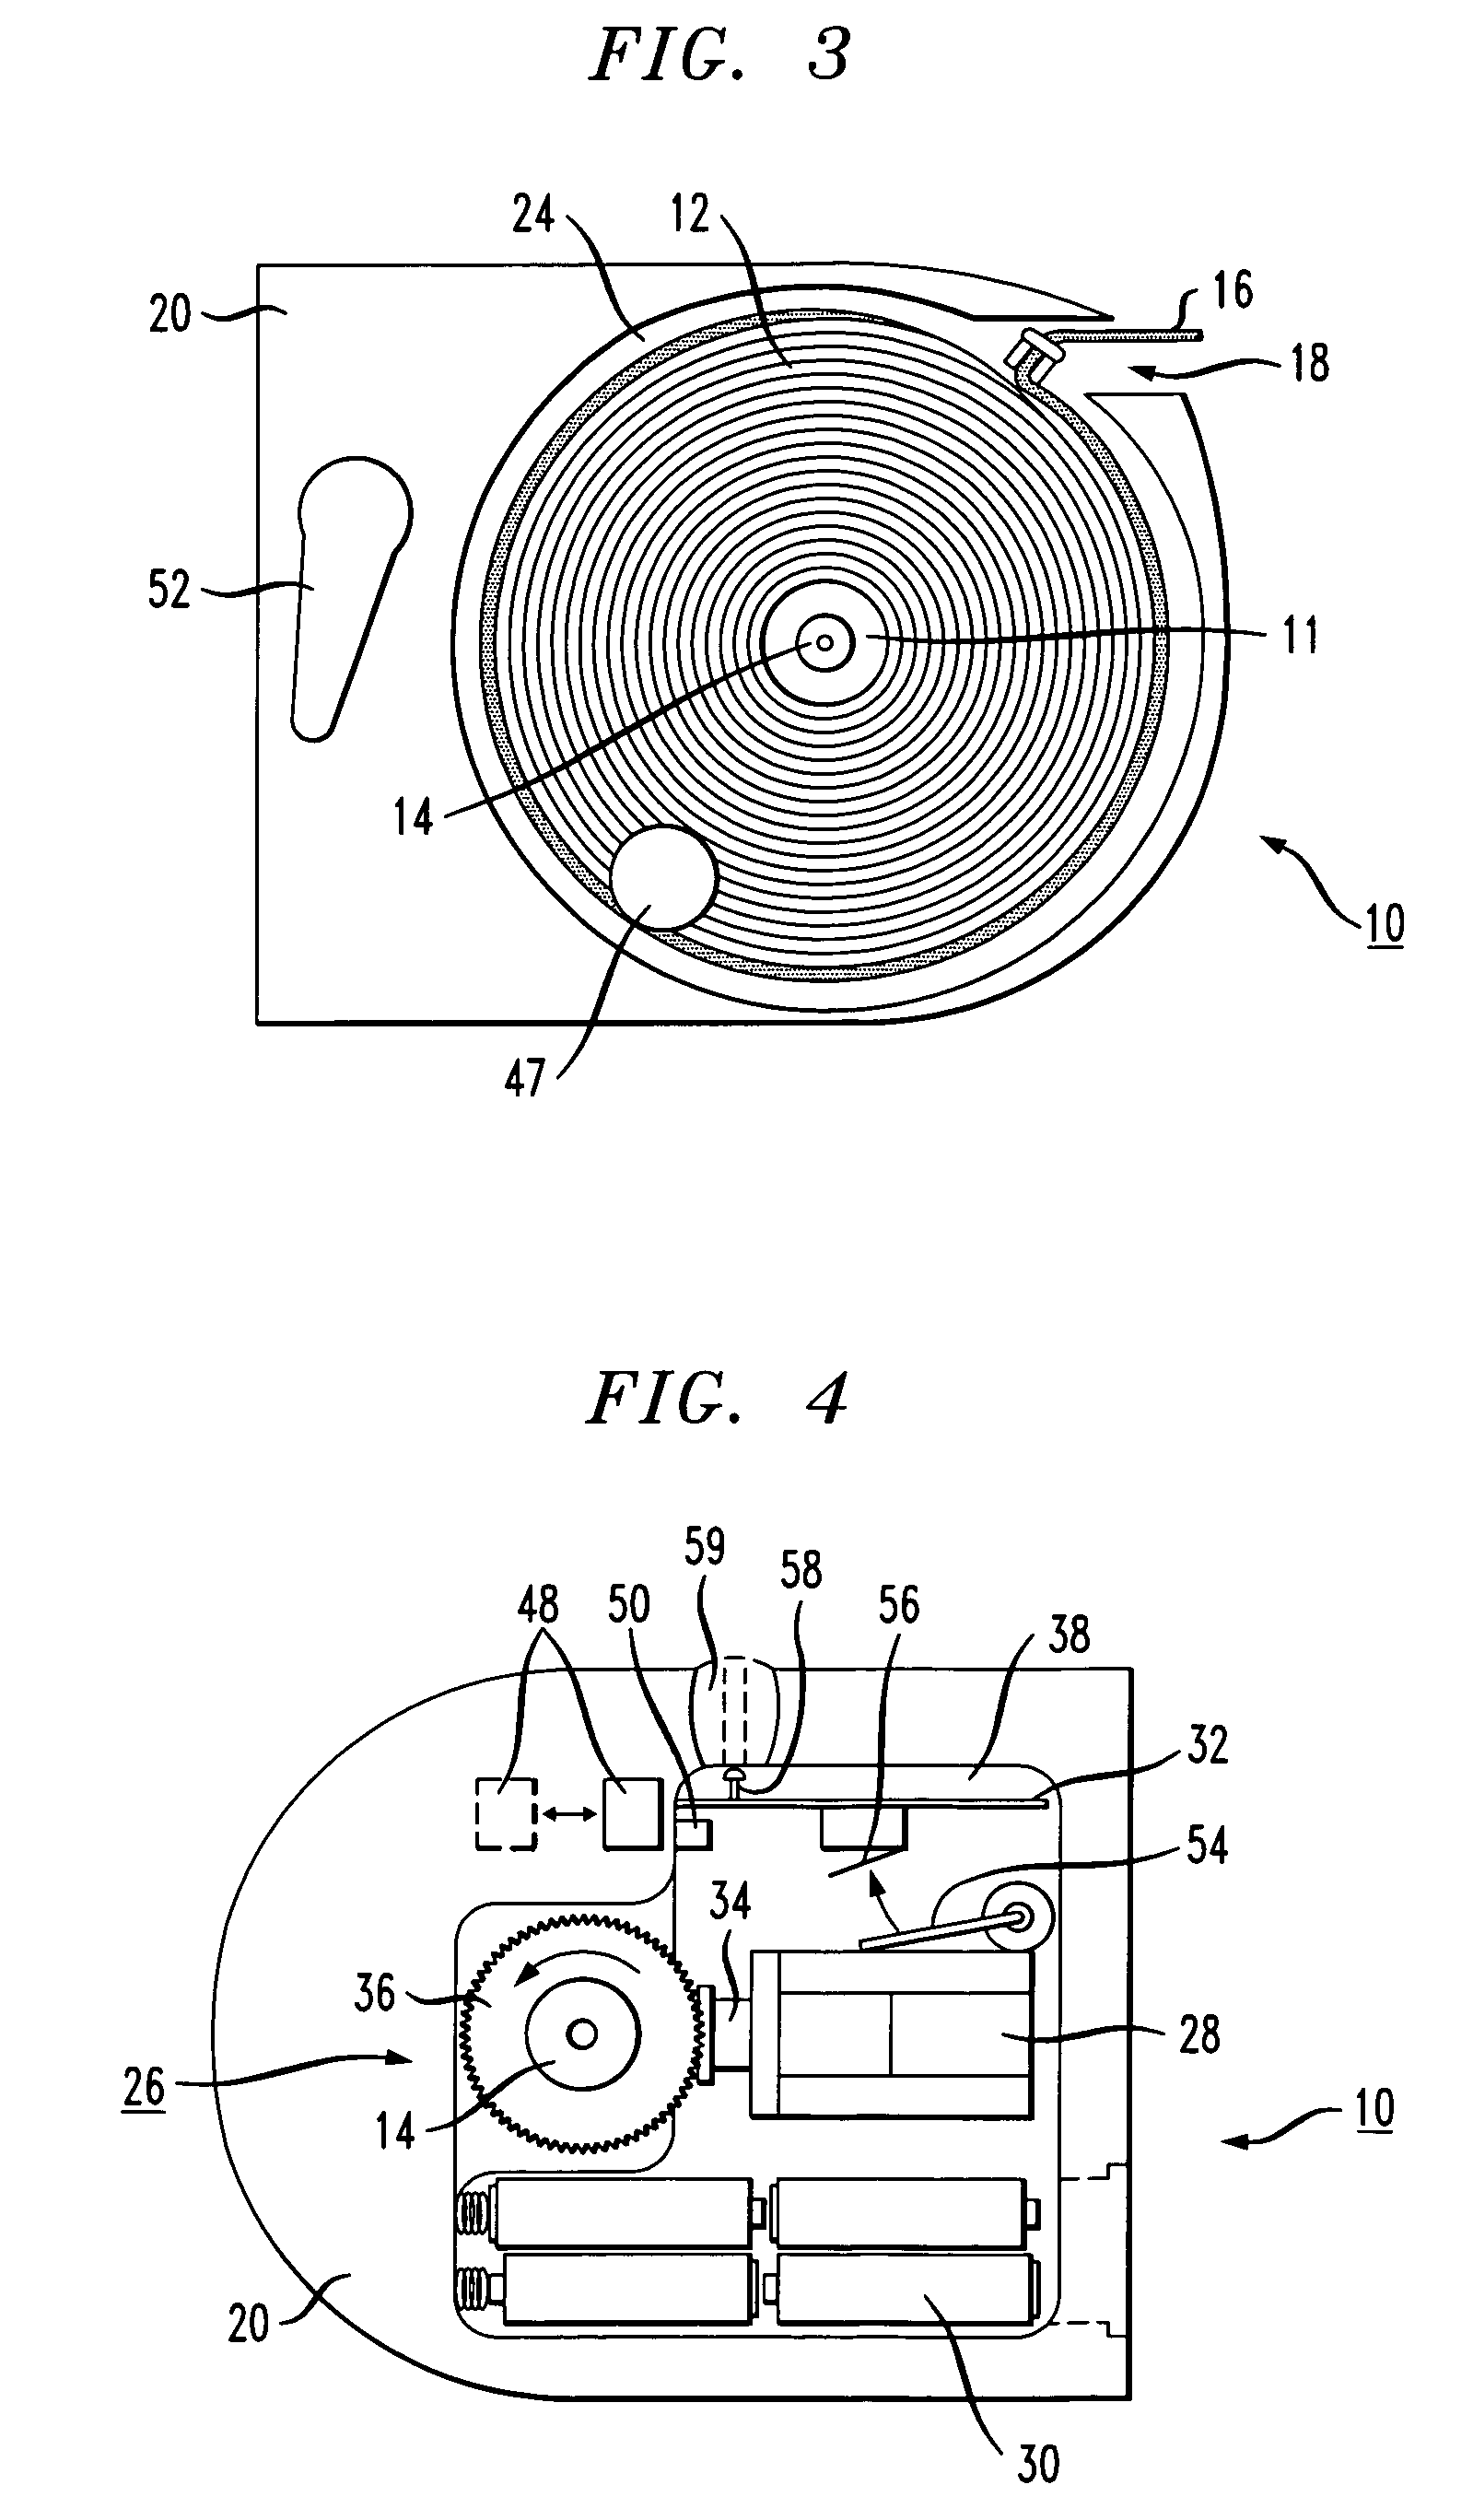 Motorized self-winding reel for divers